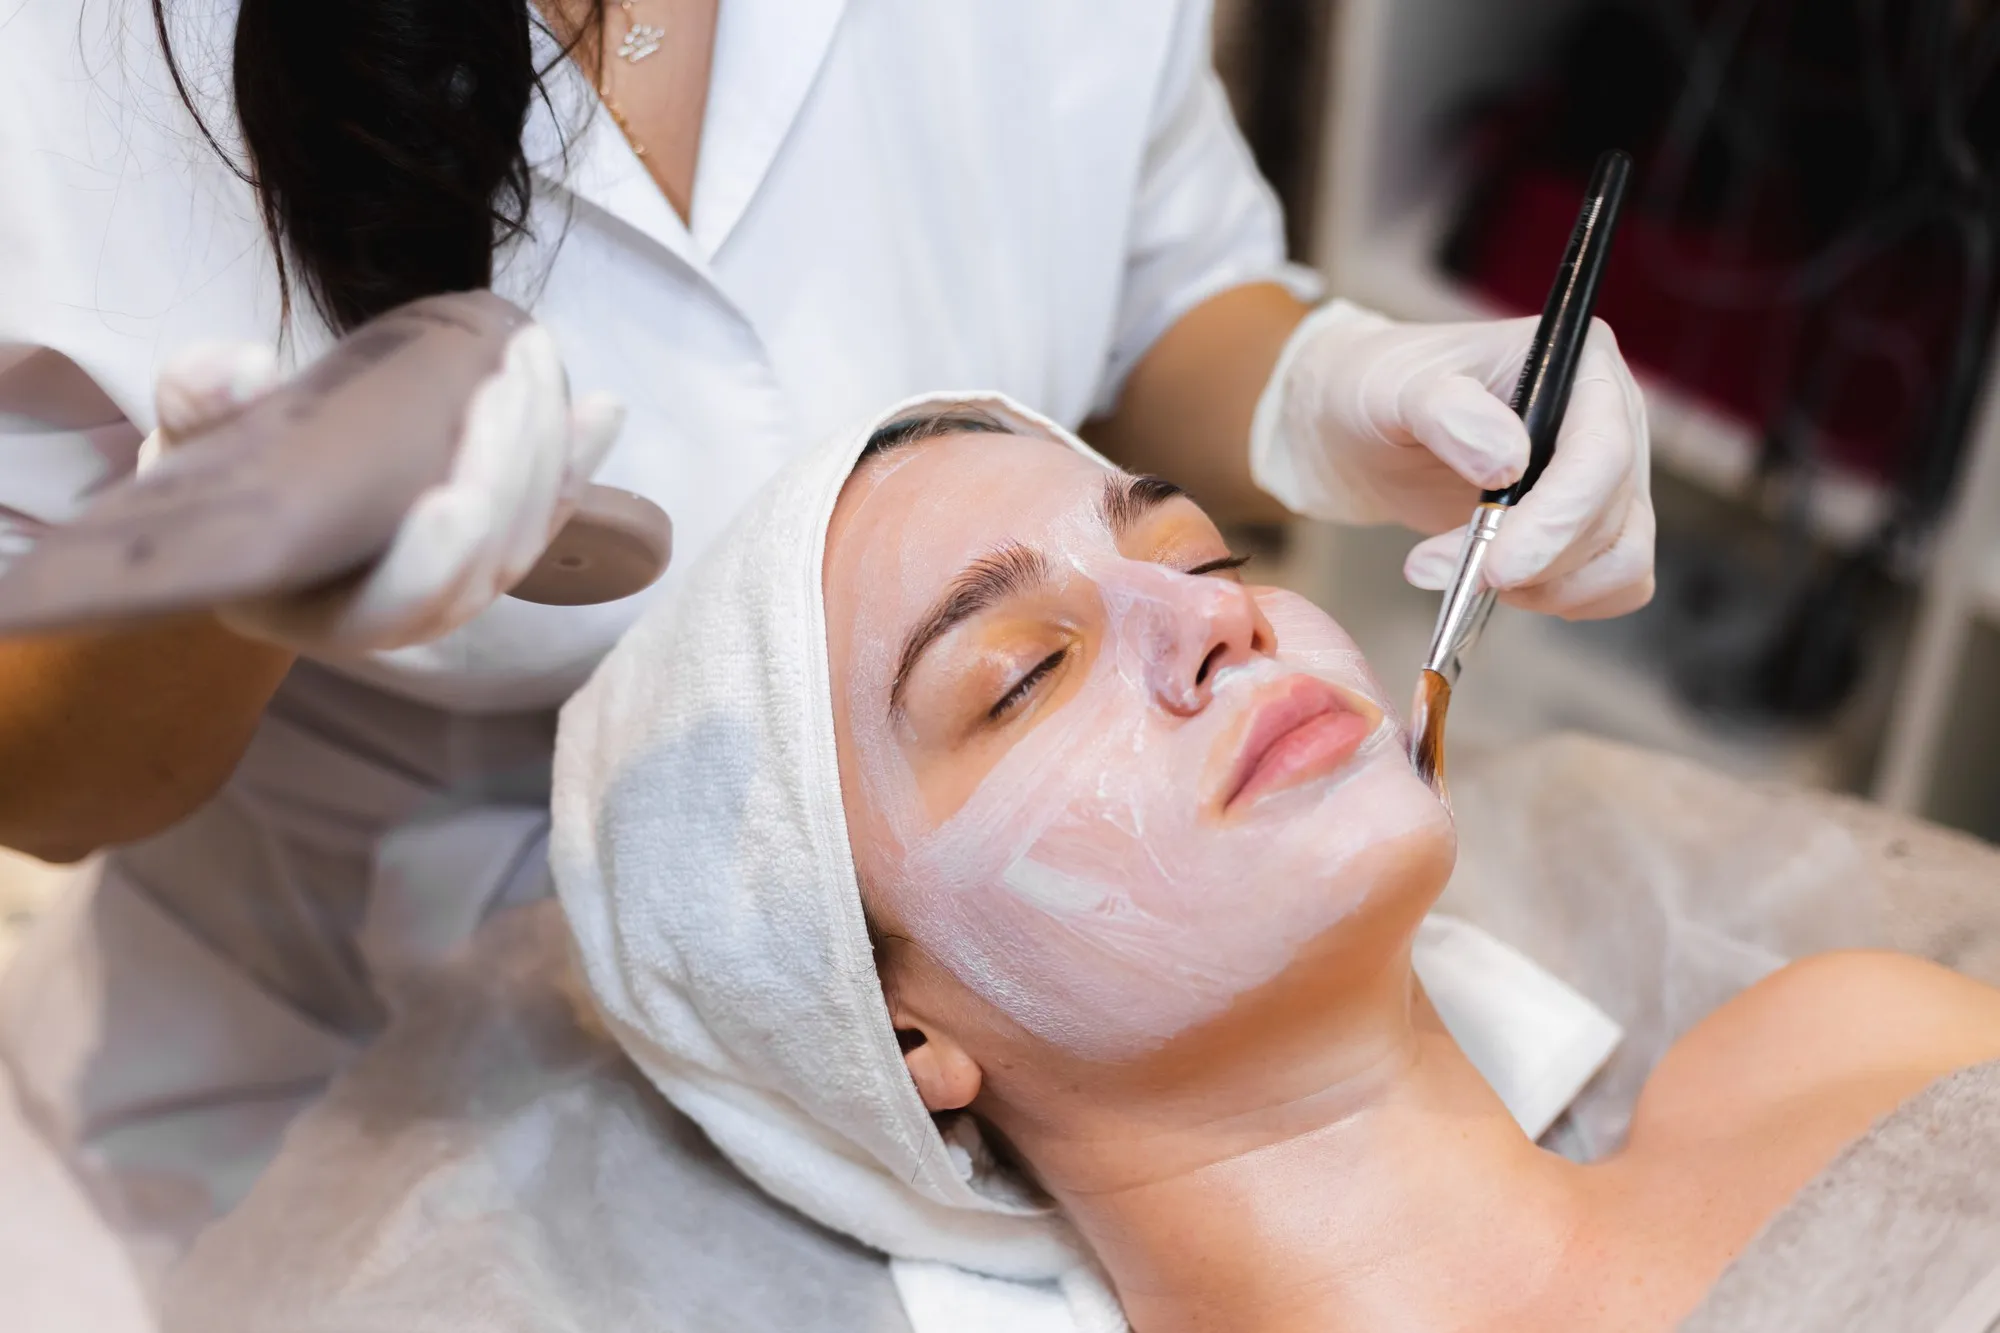 Facial Treatments Demystified Choosing the Right One for Your Skin